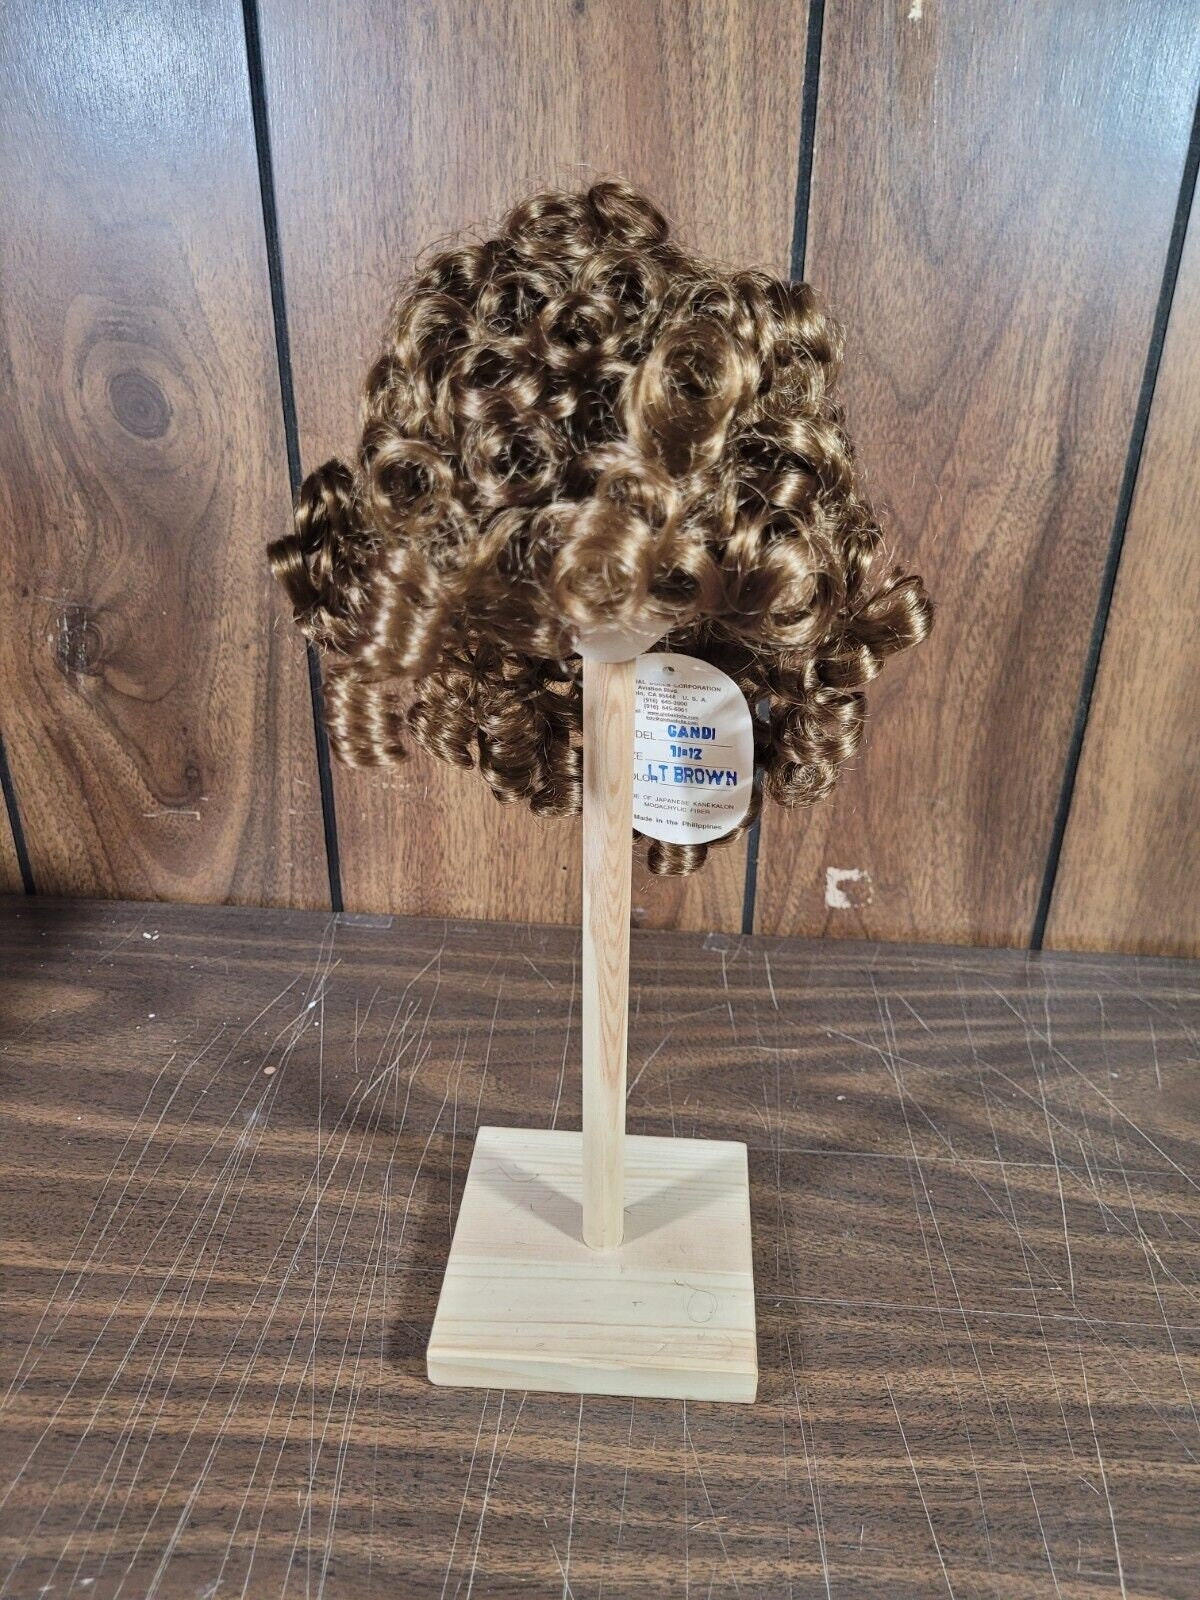 Wig Assist Size 6-7 Portable Wig Stand for Doll, Wig Styling Stand